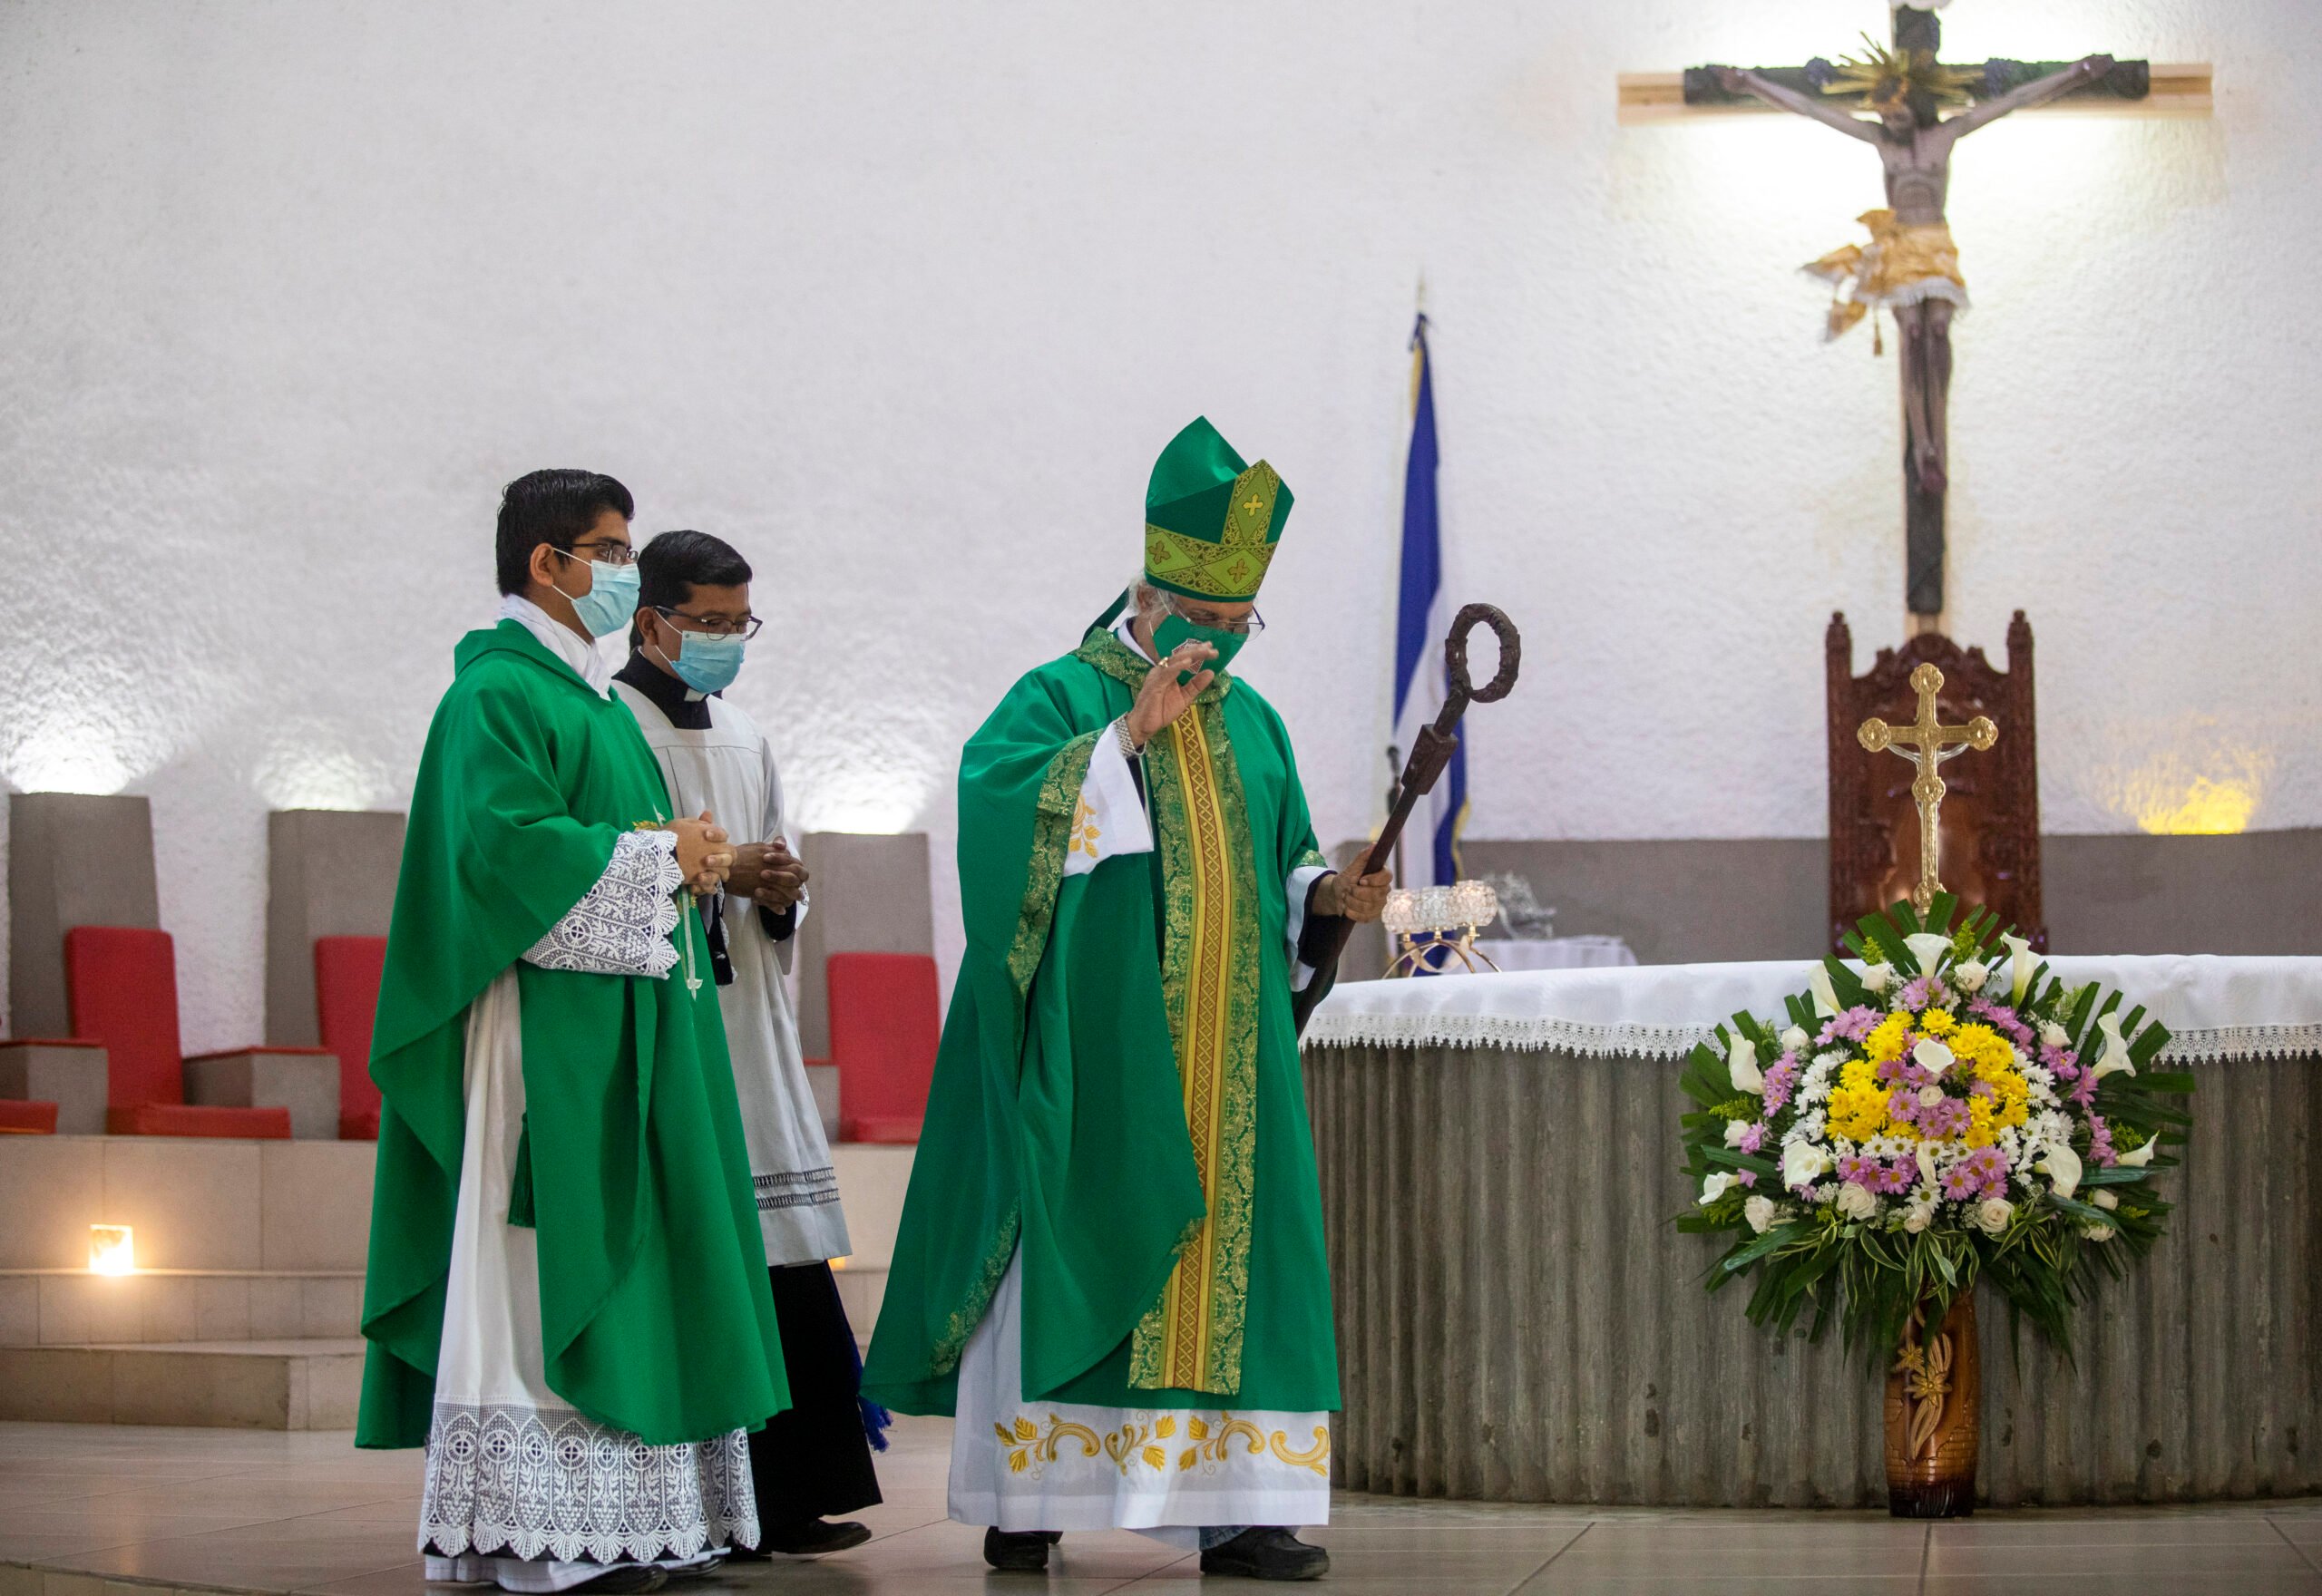 Nicaragua releases 12 Catholic priests and sends them to Rome, following agreement with the Vatican